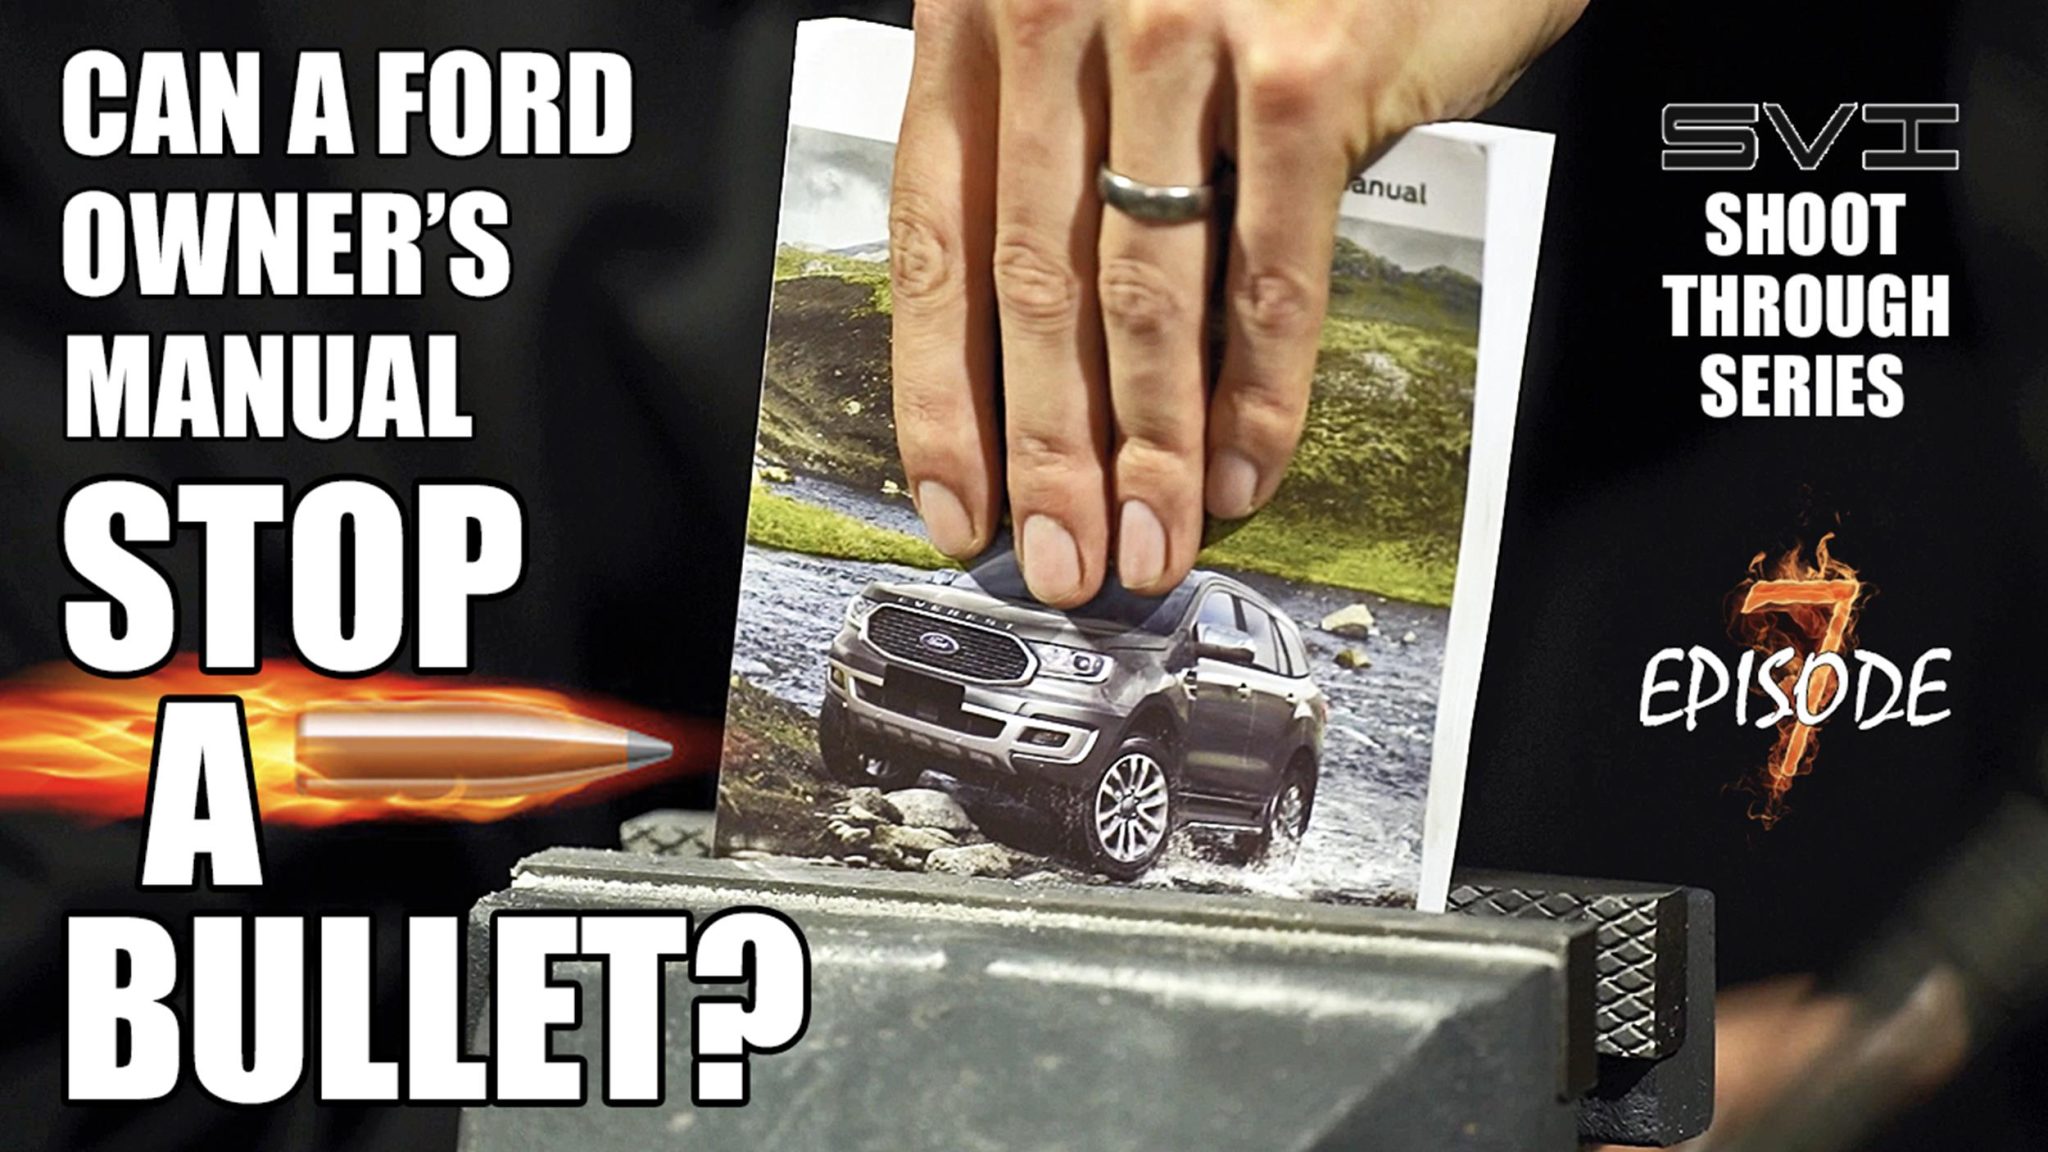 Can a Ford Everest owner's manual stop a bullet?